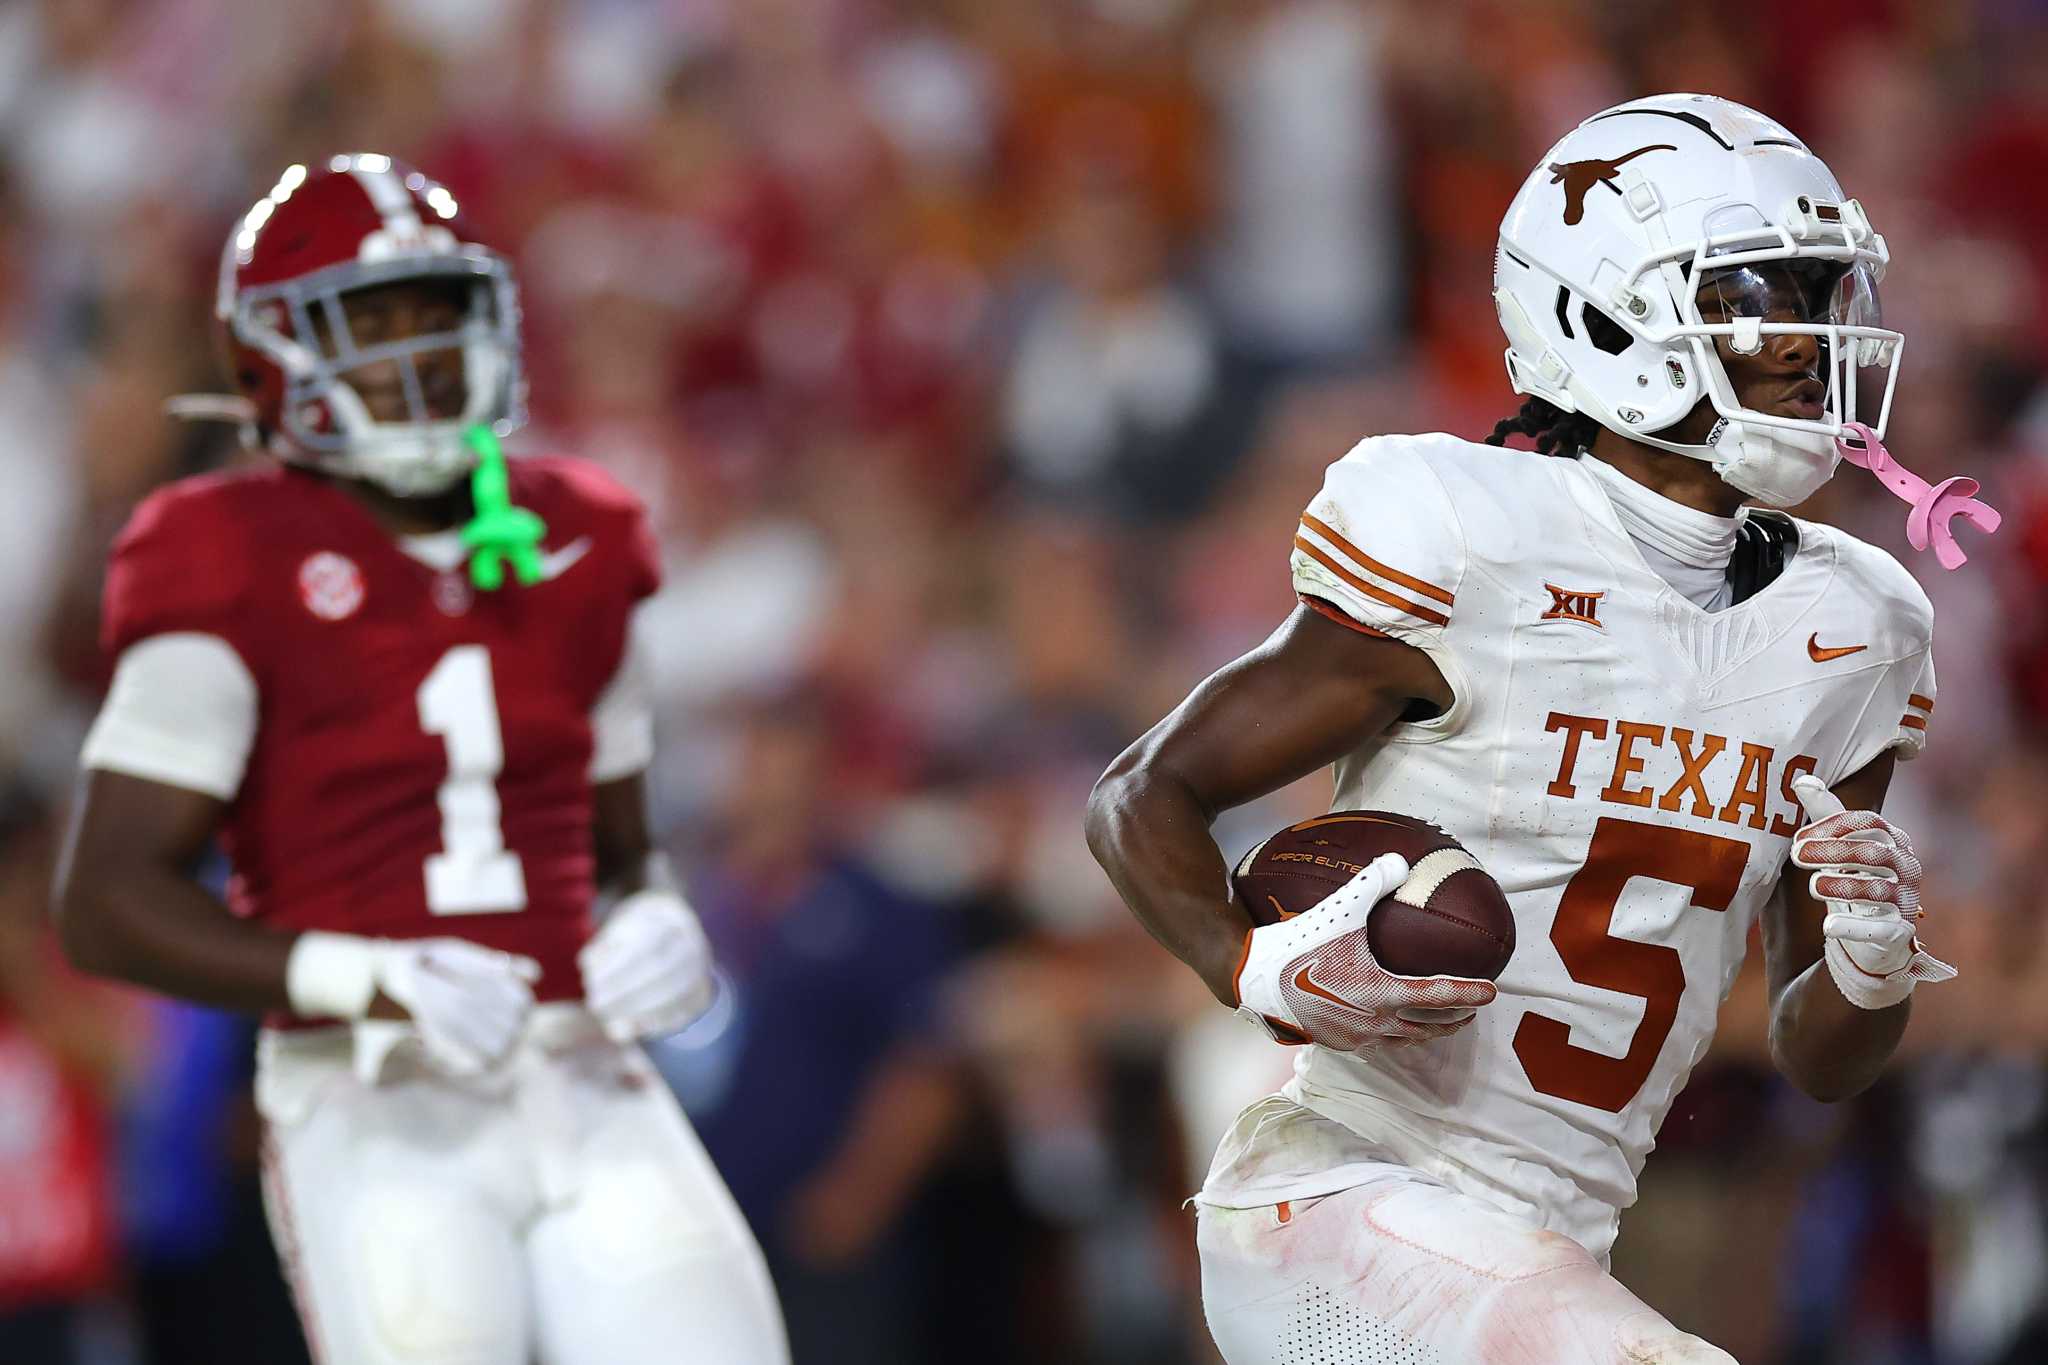 At long last, Texas beats Alabama and slays some ghosts